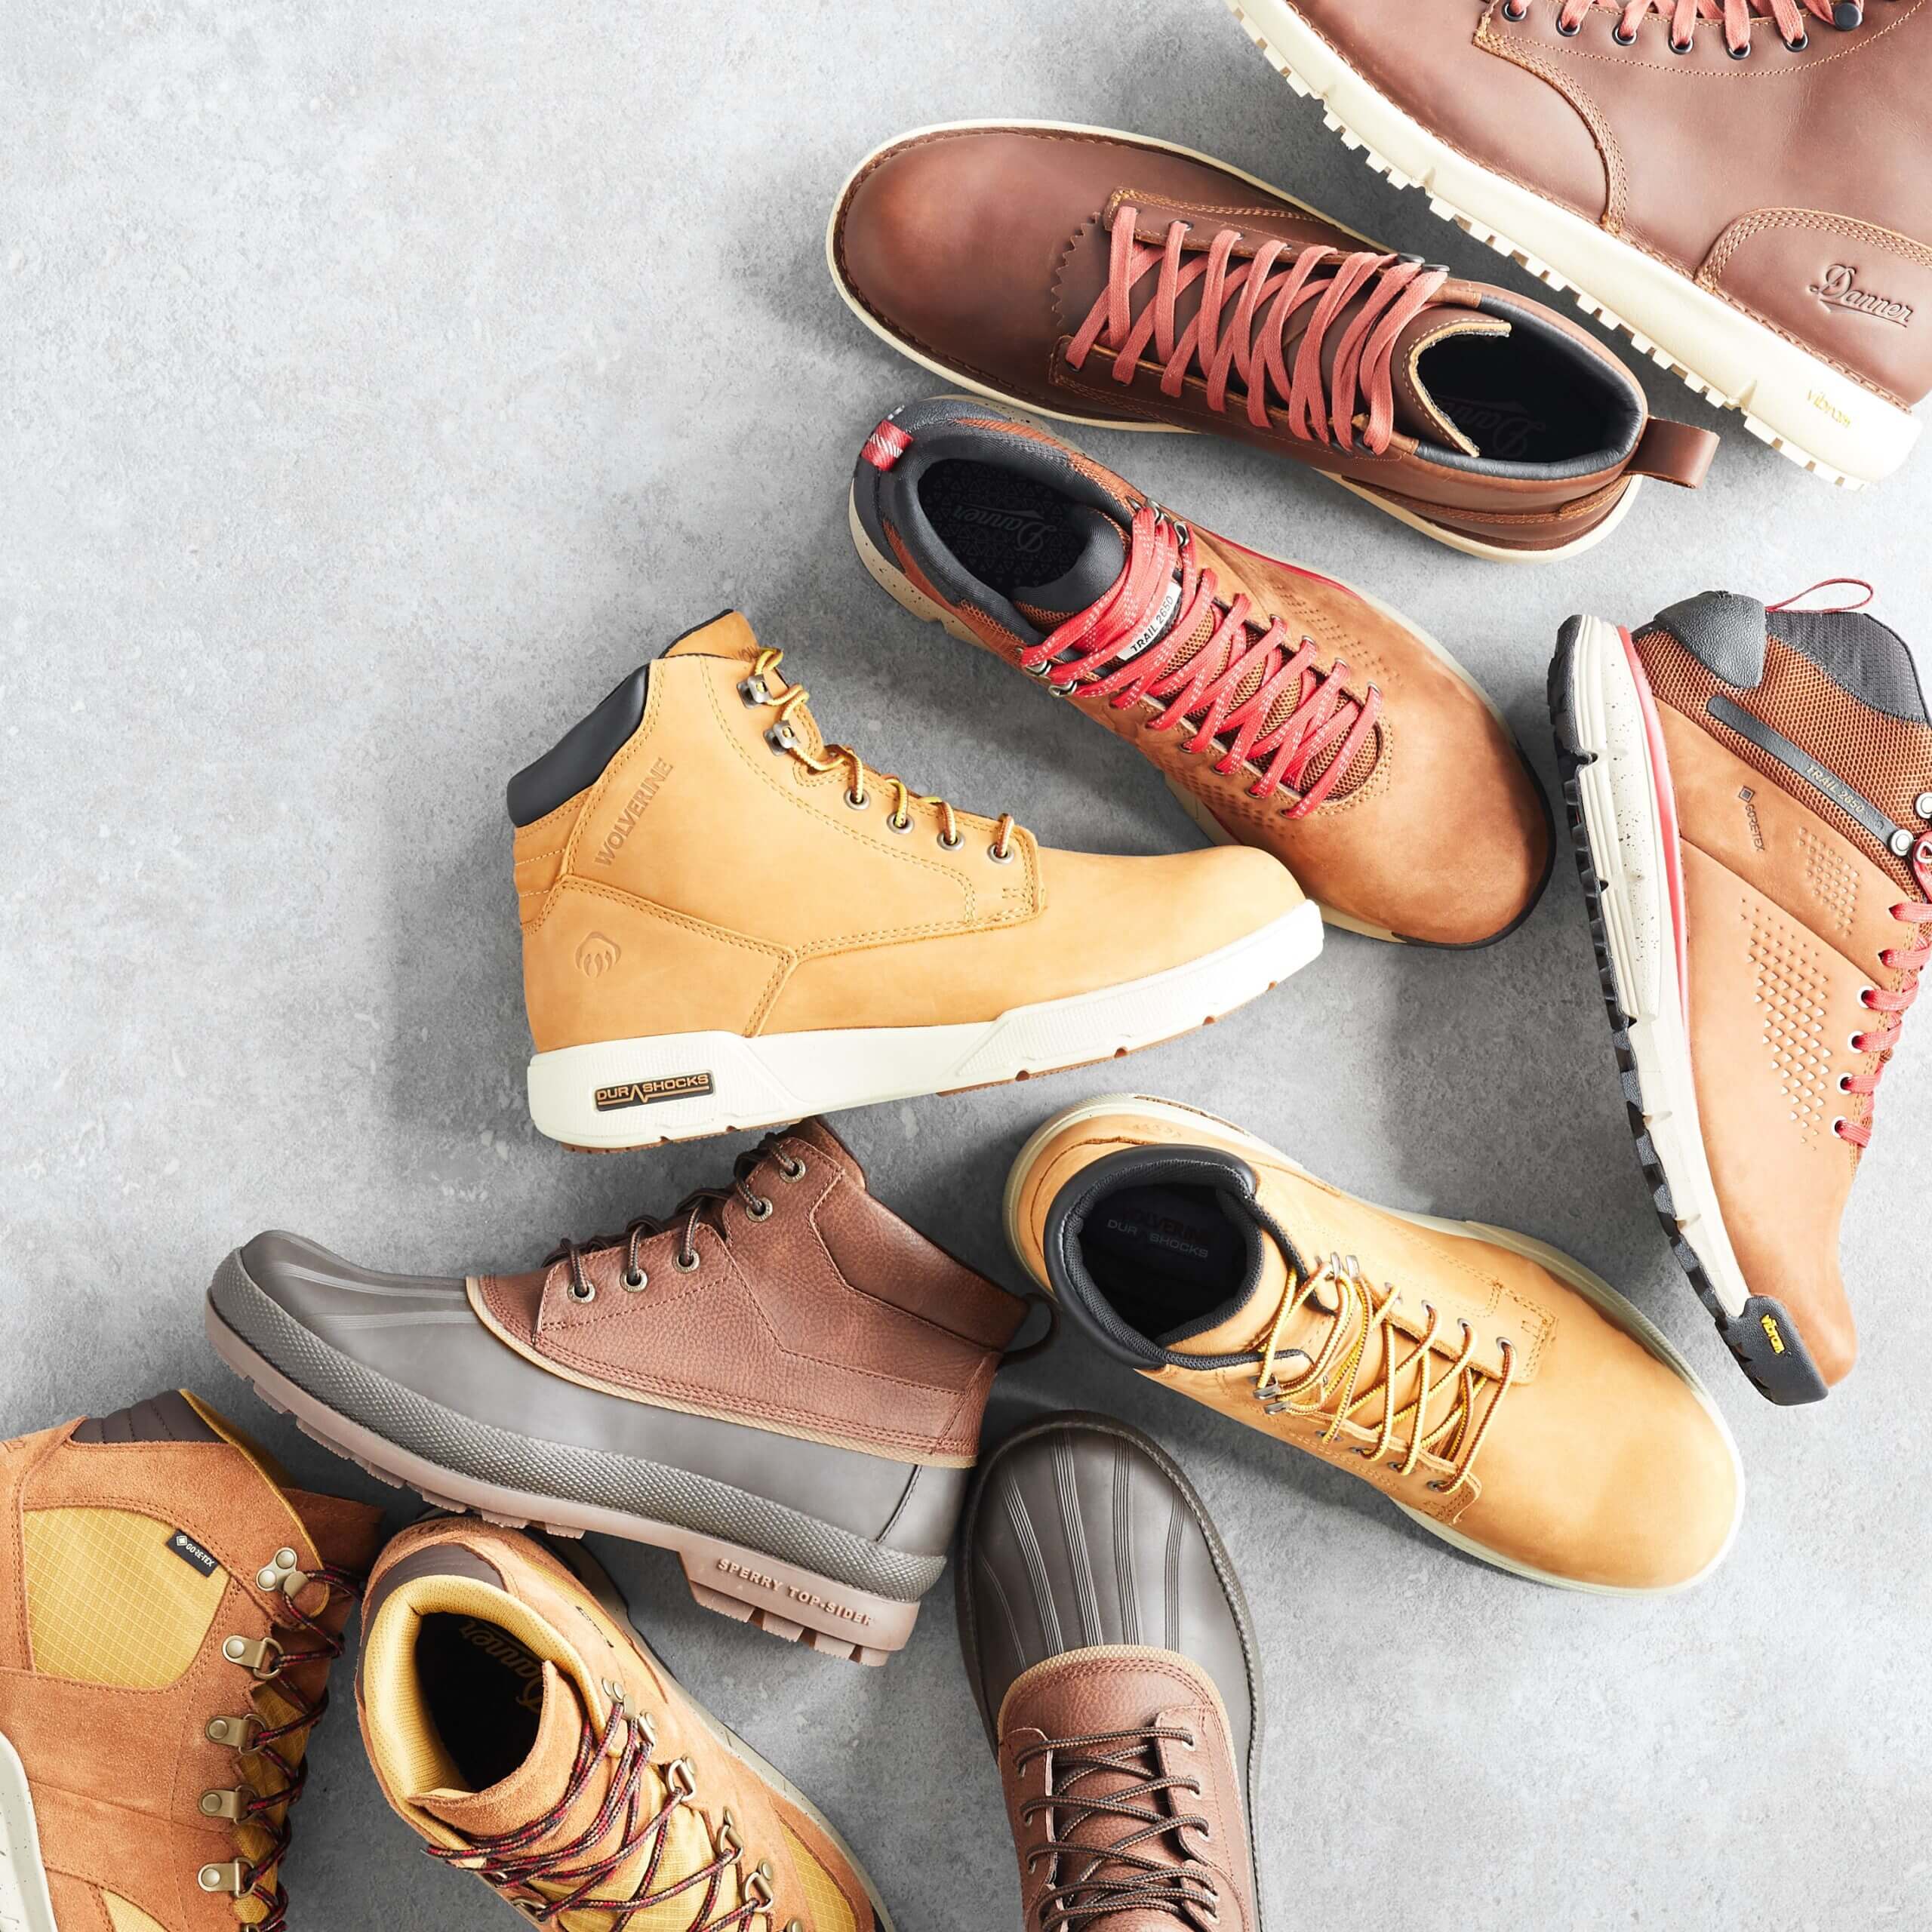 Stitch Fix men’s boot collection featuring duck boots and assorted lace-up brown leather boots with sport bottoms.